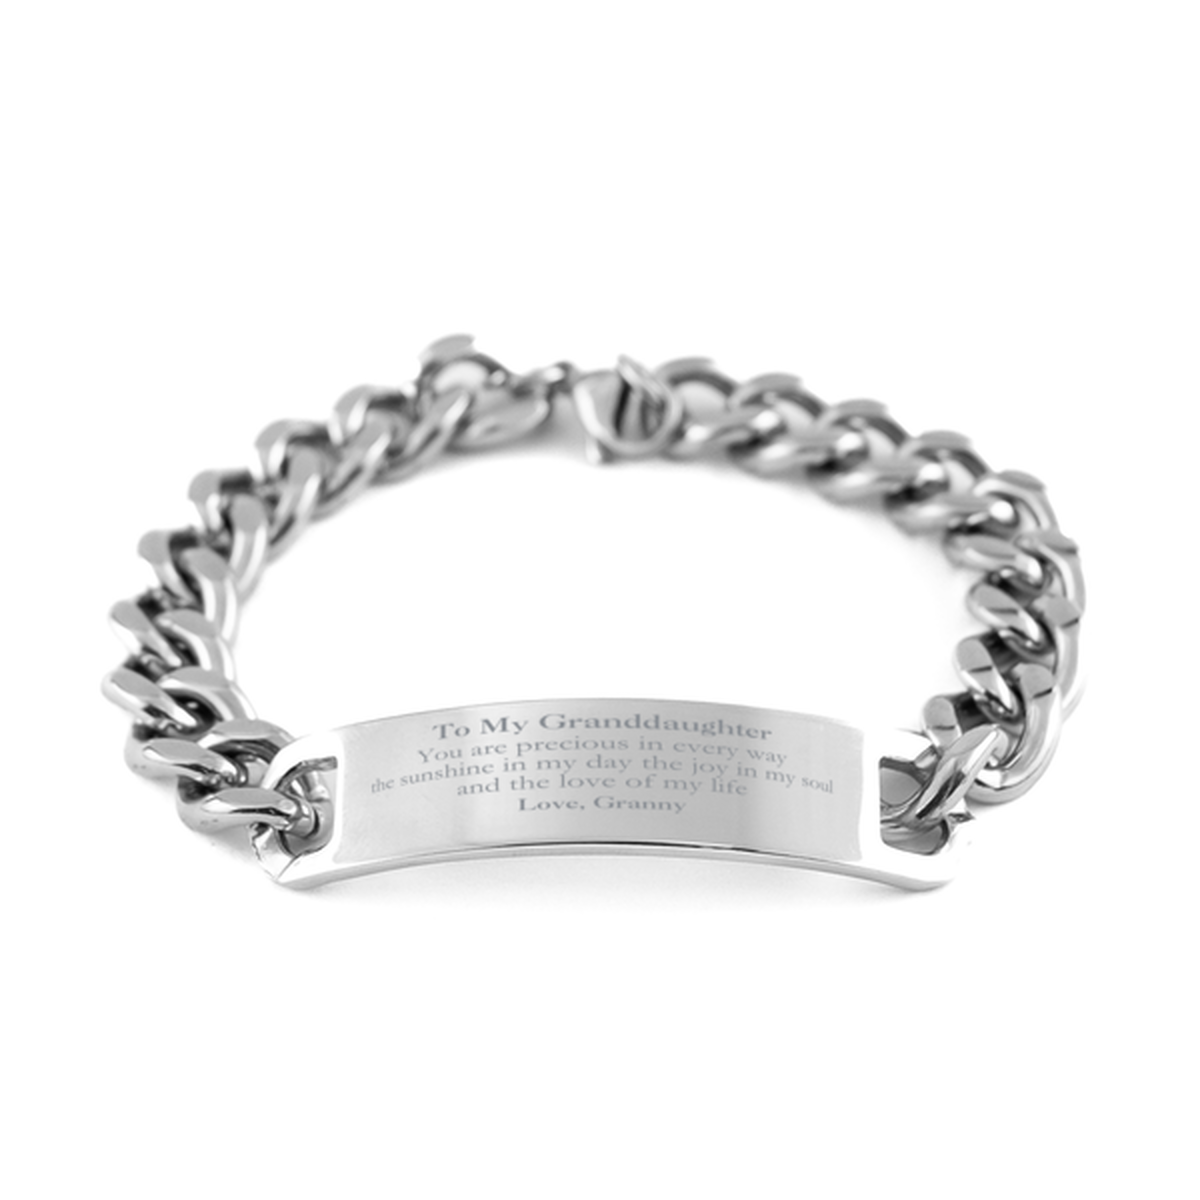 Graduation Gifts for Granddaughter Cuban Chain Stainless Steel Bracelet Present from Granny, Christmas Granddaughter Birthday Gifts Granddaughter You are precious in every way the sunshine in my day. Love, Granny